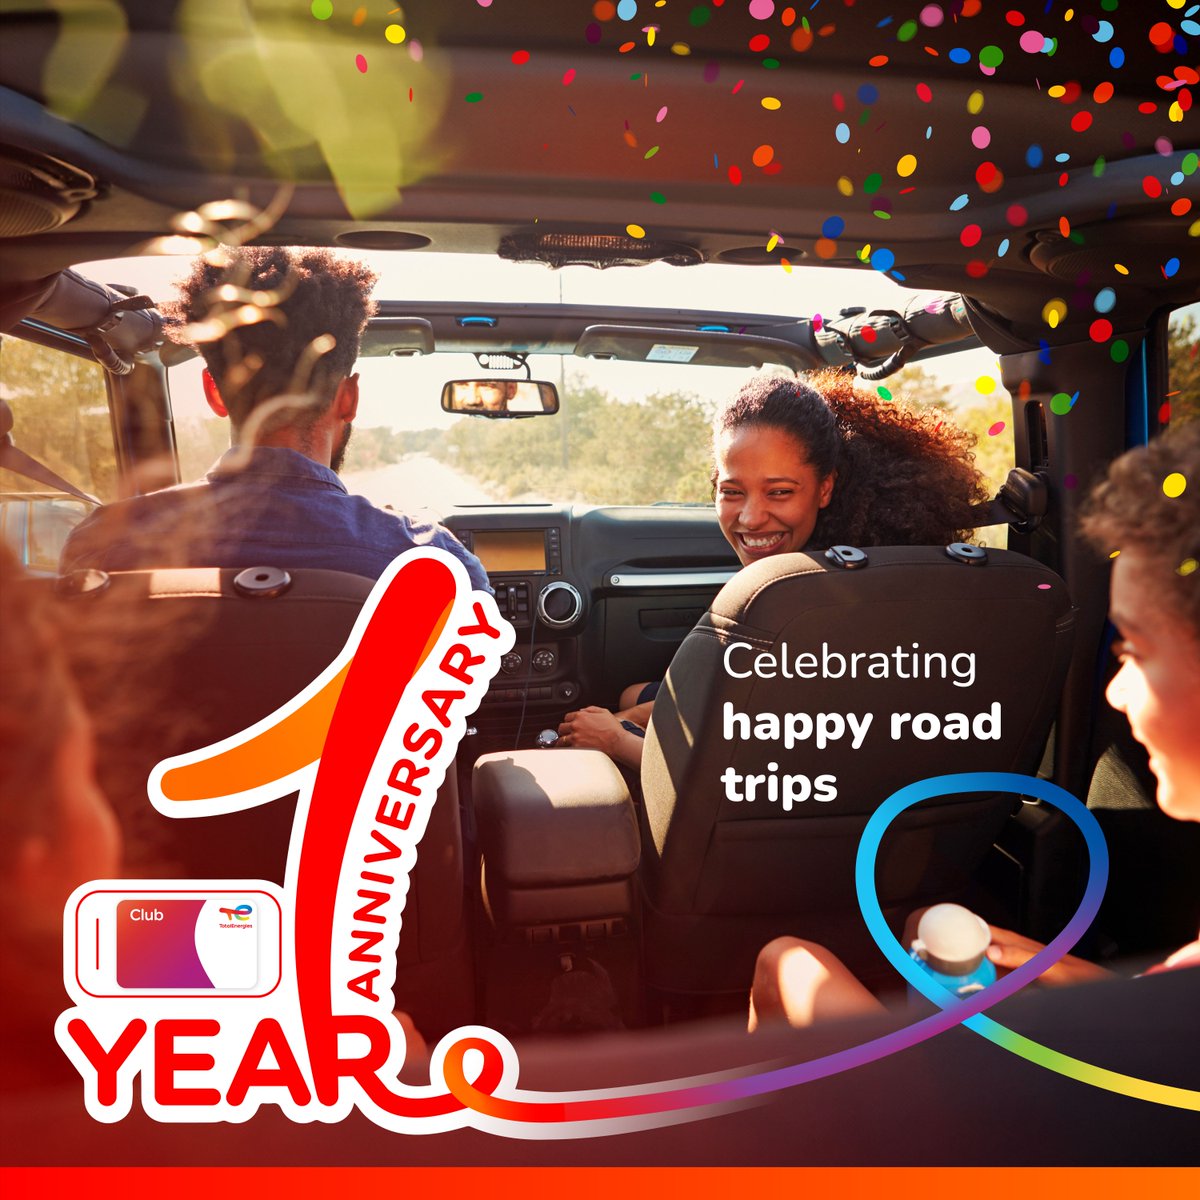 1 Year of TotalEnergies Club and here's how we're celebrating 🎉😎 You could win Sea Boat Blue Fieldbar when you spend R500+ on the forecourt or in-store. 🏆 Additionally, Every 100th shopper gets 10,000 points 🤑 Join the Club 👉 club.totalenergies.co.za